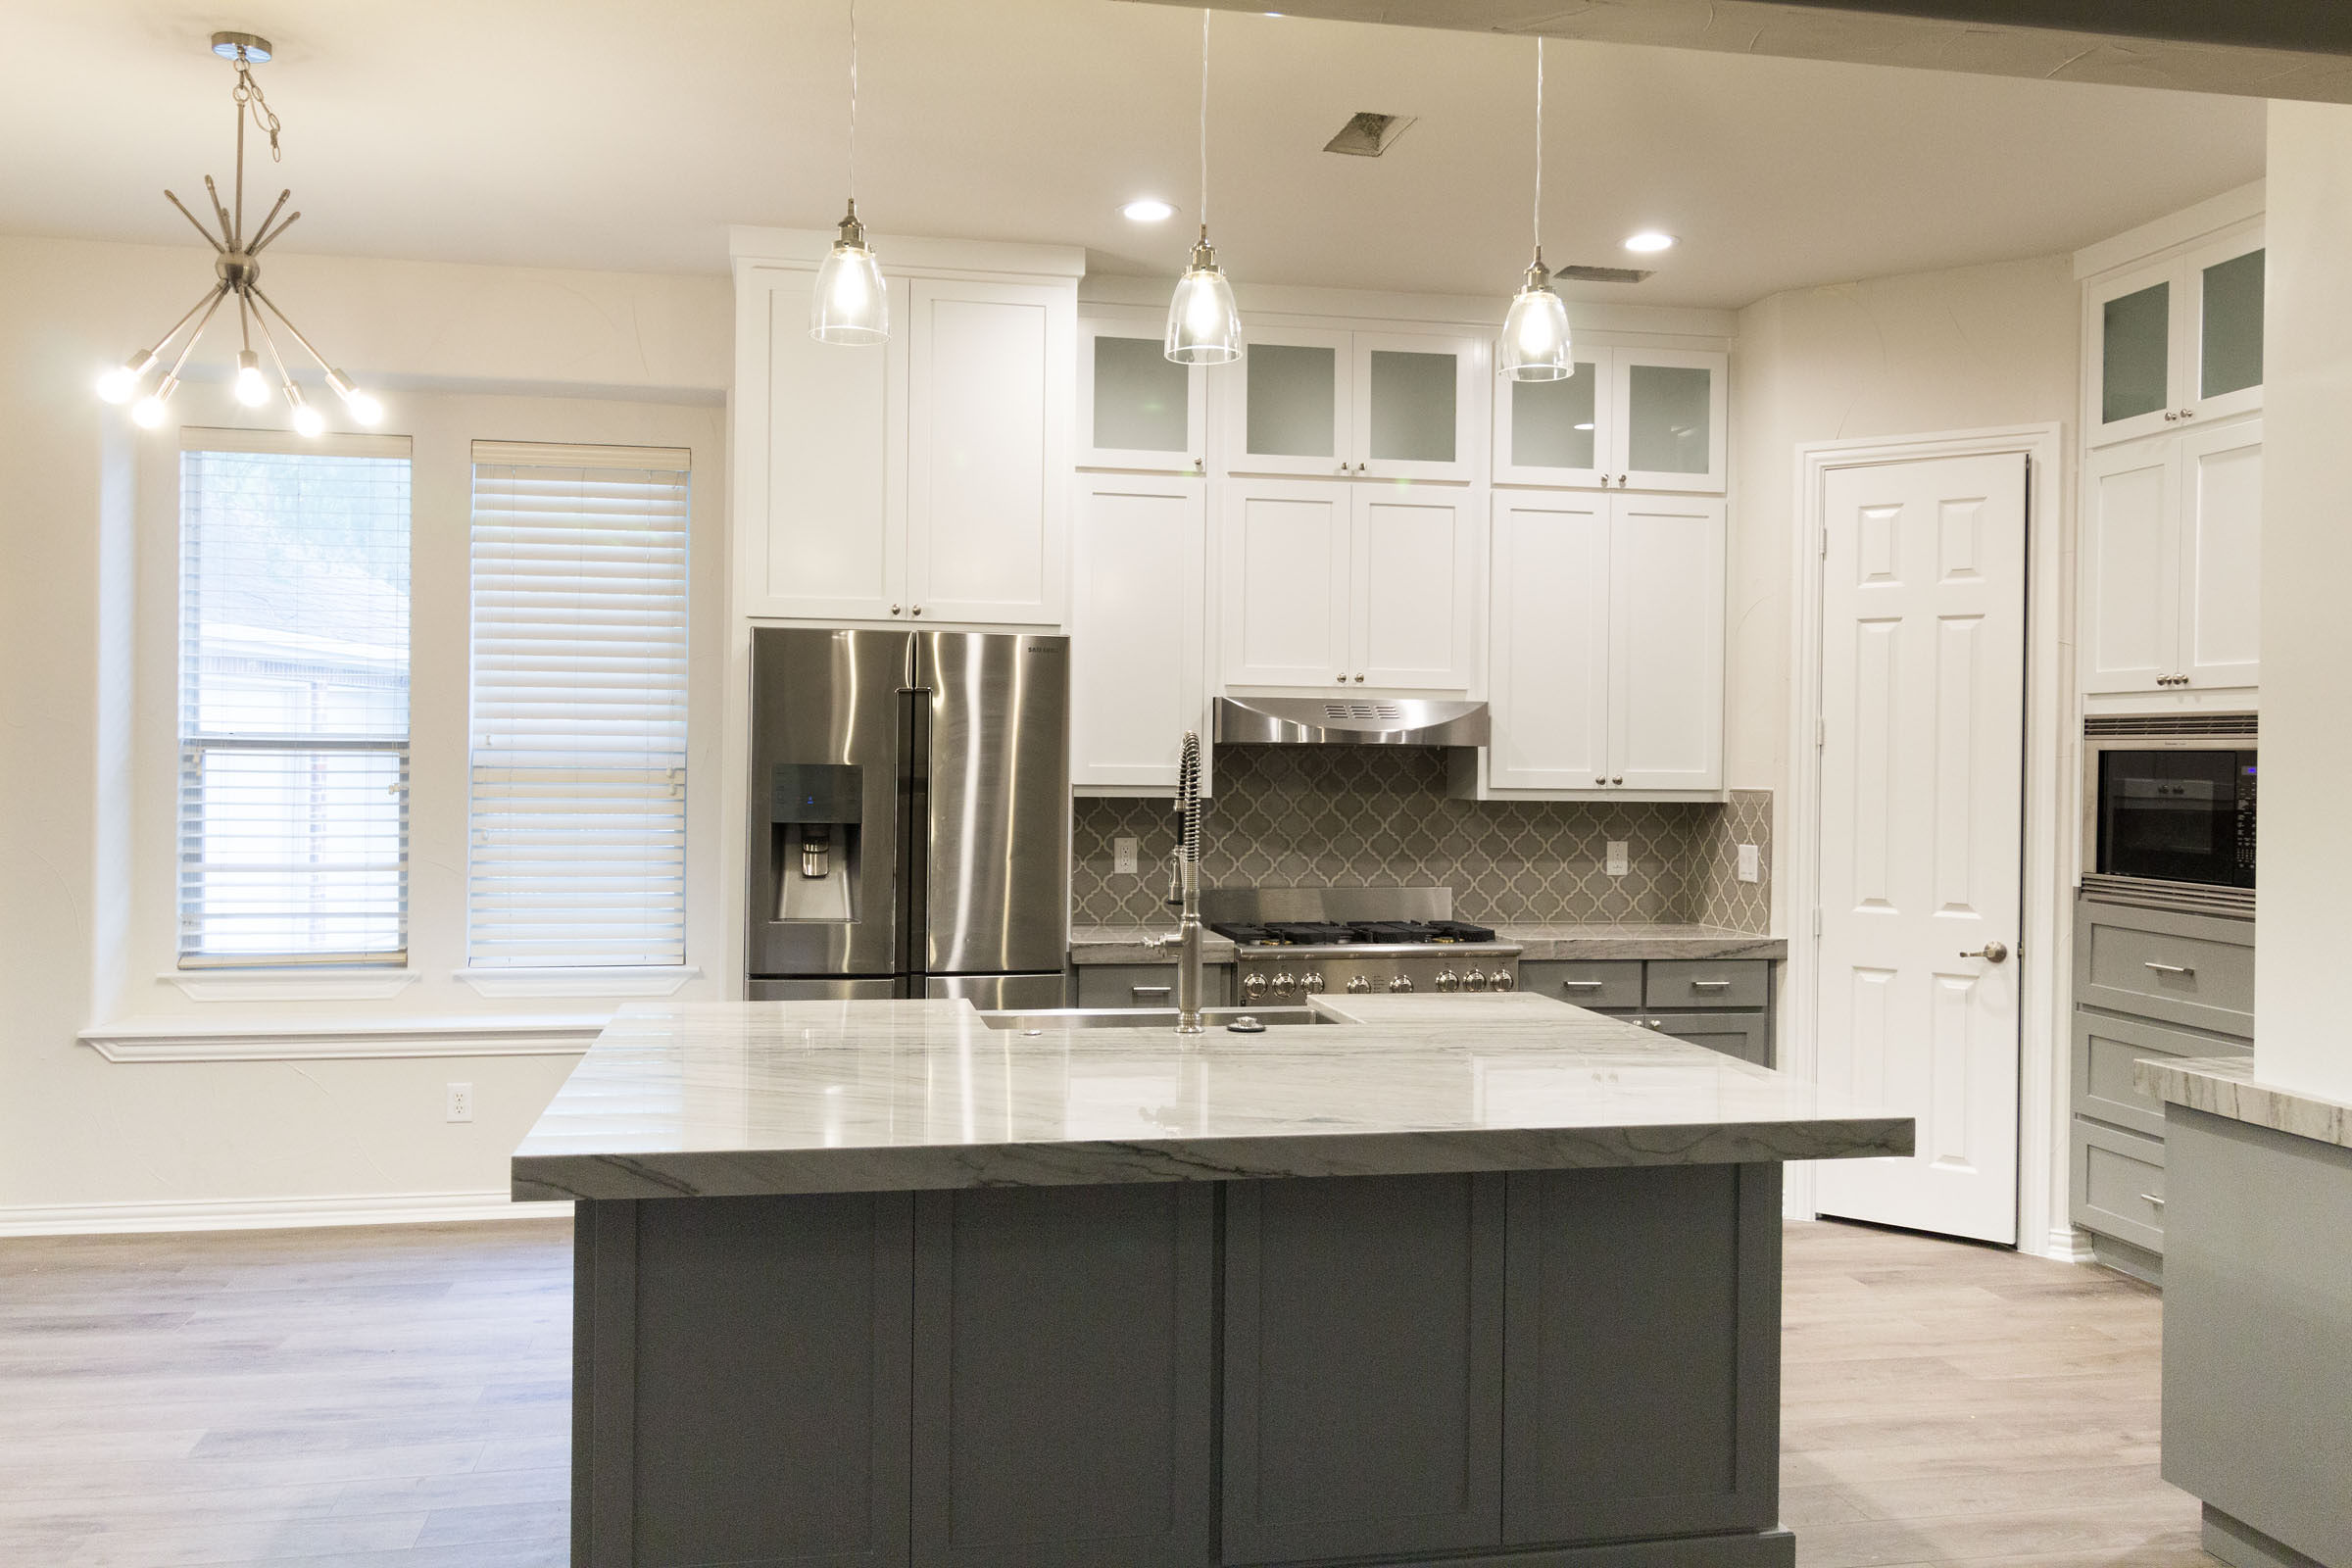 Open floor plan, kitchen remodel, kitchen island, storage and counterspace, white and grey, stunning